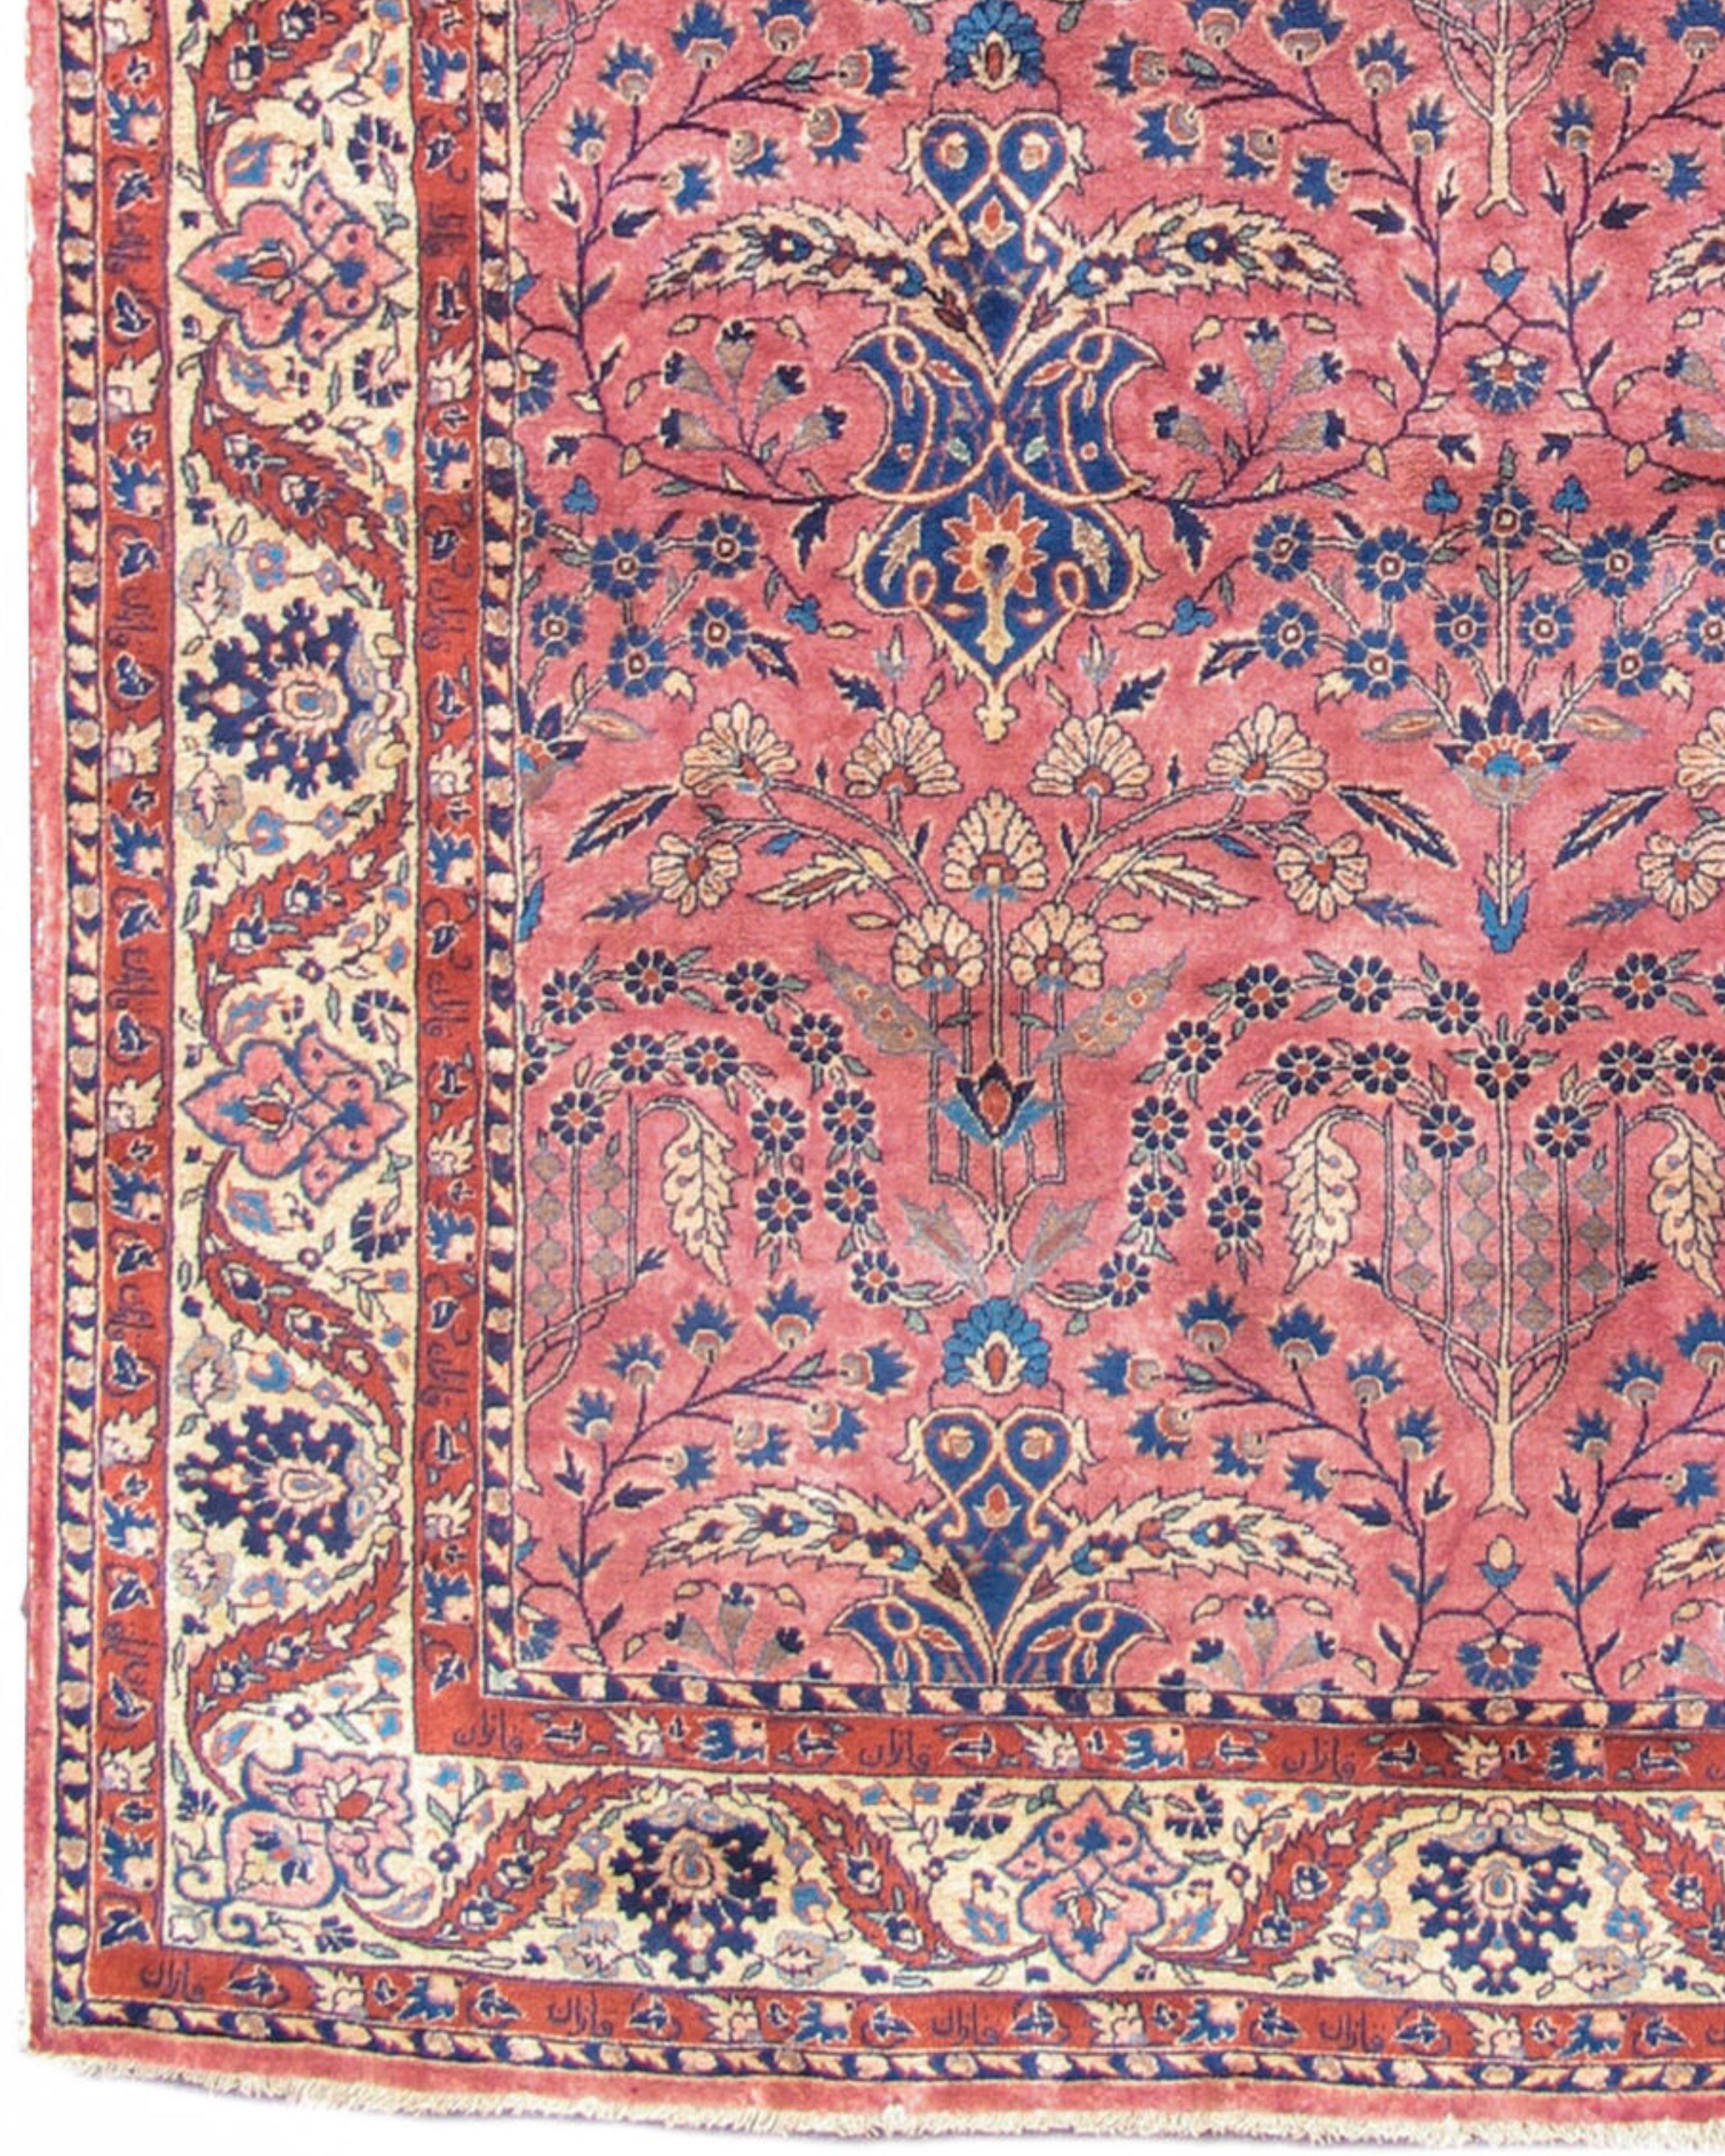 Hand-Knotted Antique Persian Ghazan Sarouk Rug, c. 1900 For Sale